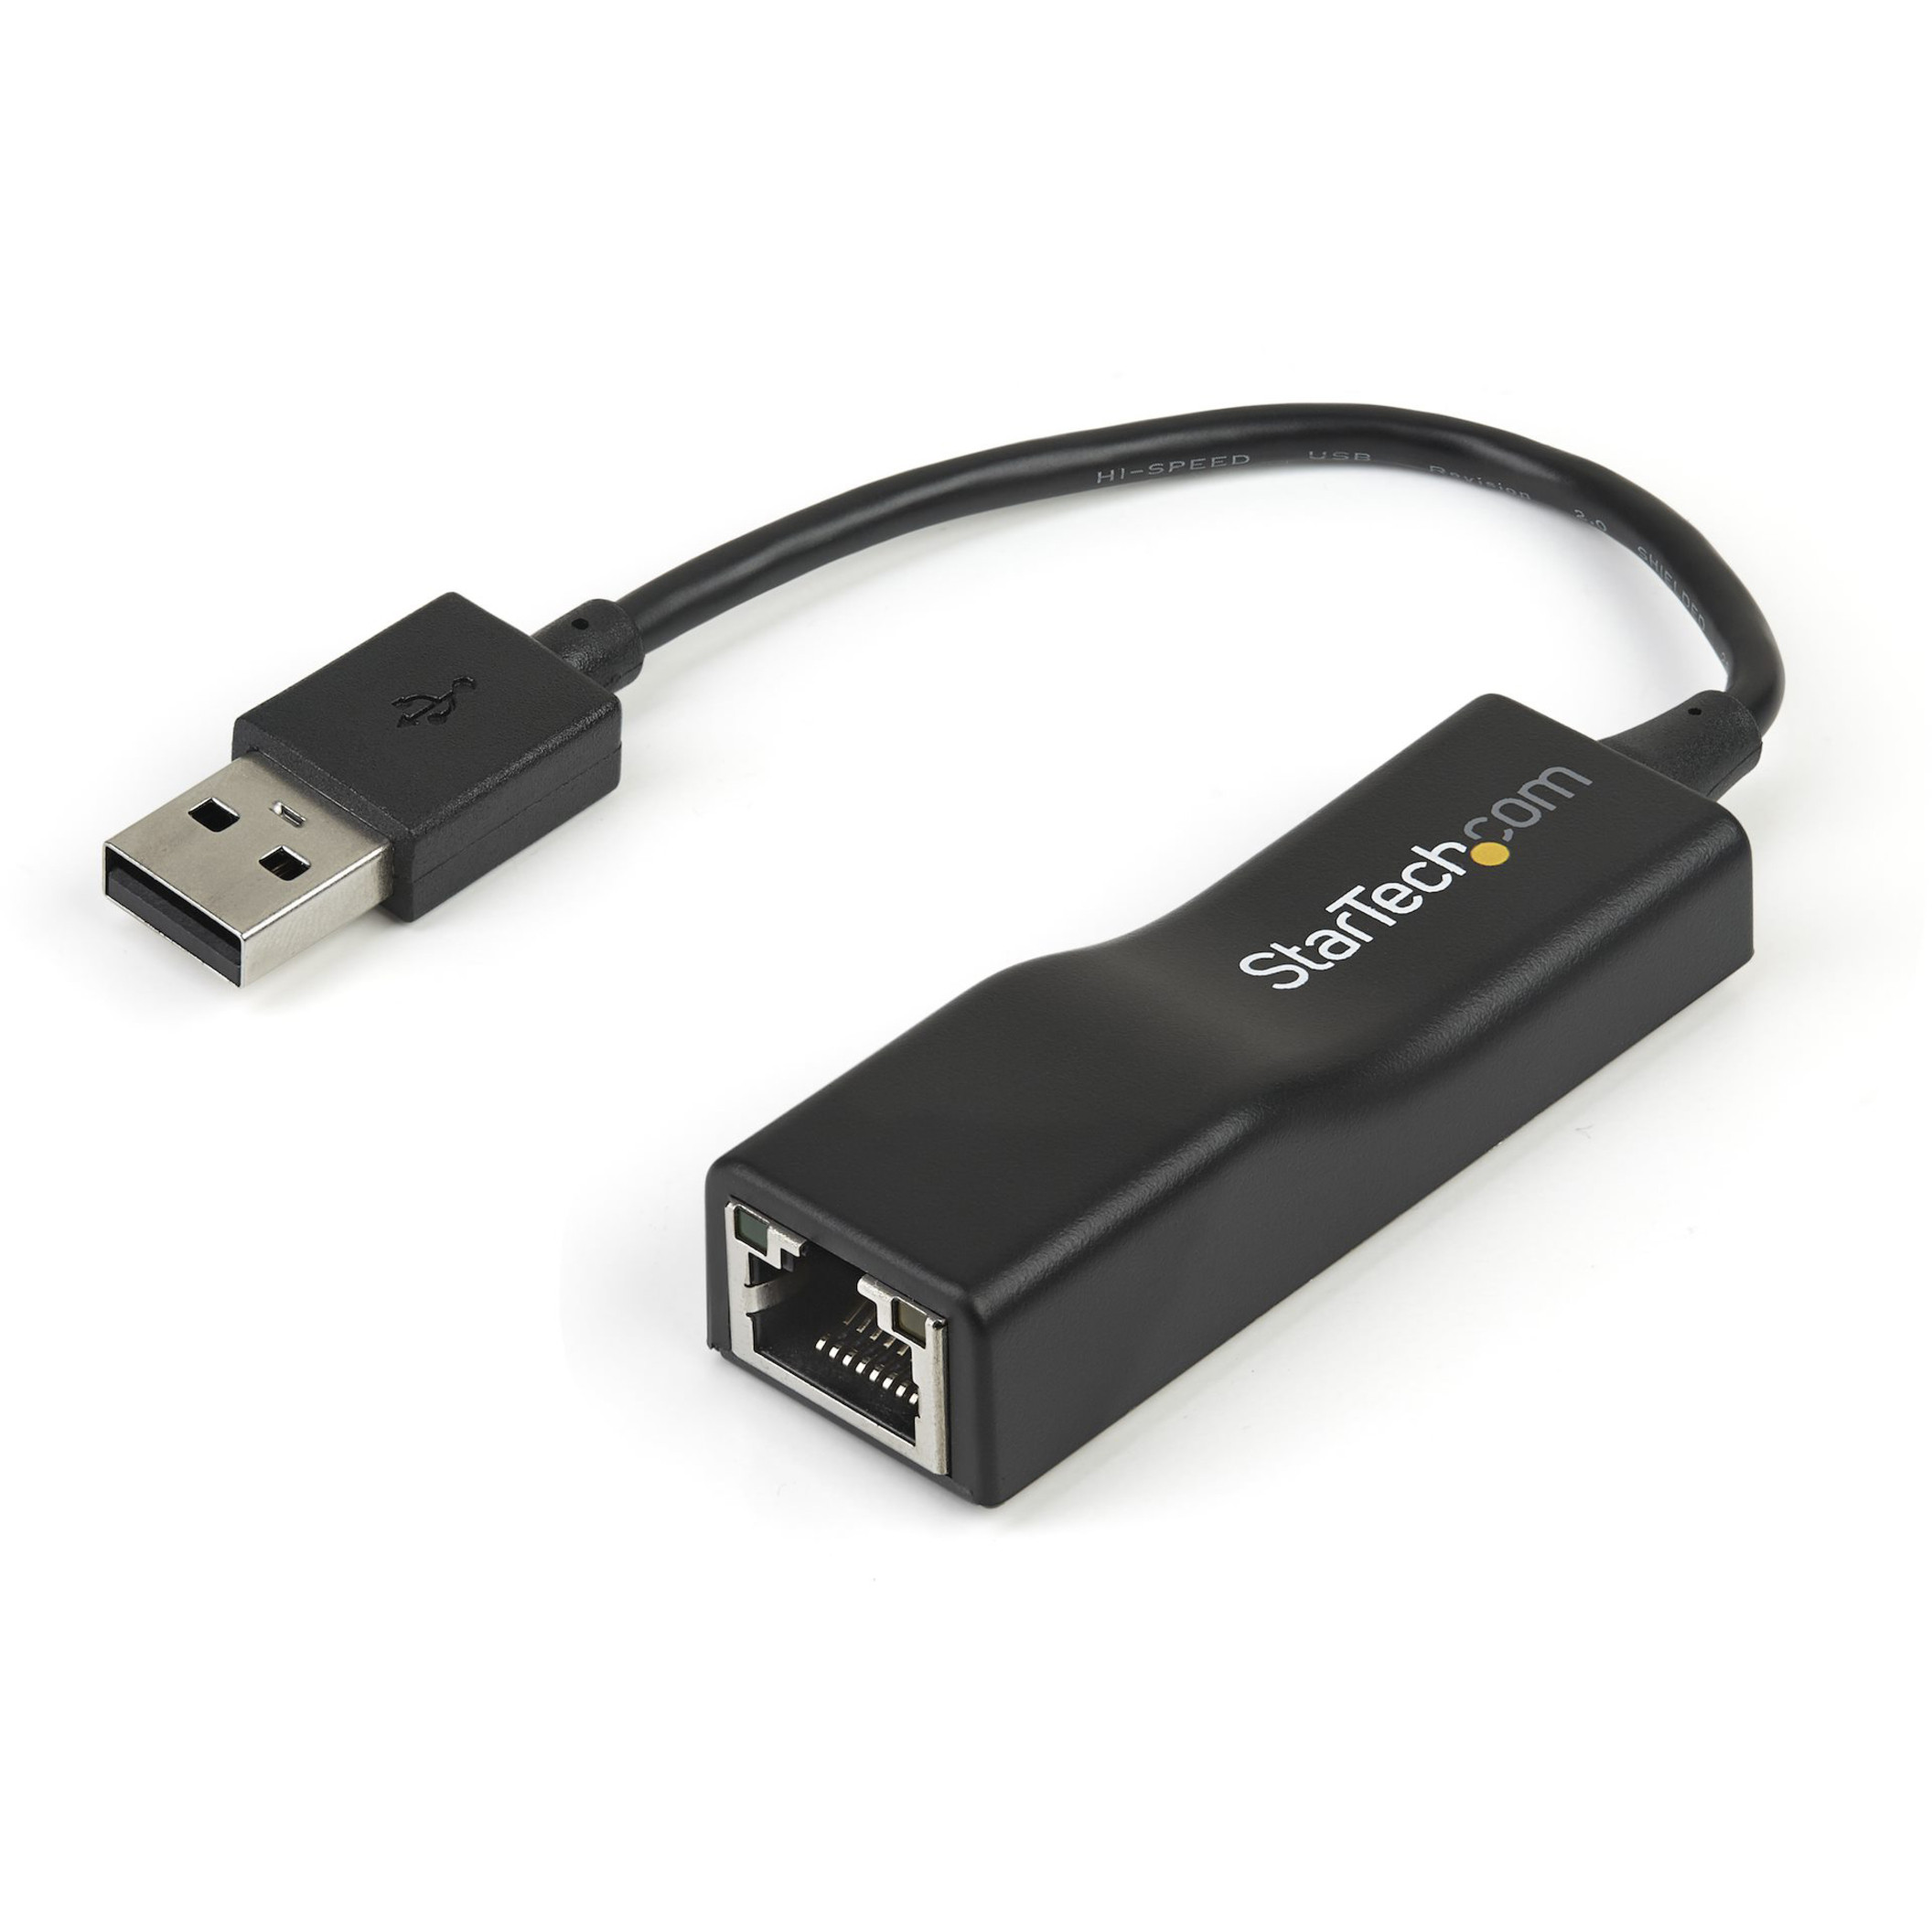 Startech .com USB 2.0 to 10/100 Mbps Ethernet Network Adapter DongleAdd a 10/100Mbps Ethernet port to your laptop or desktop computer through… USB2100